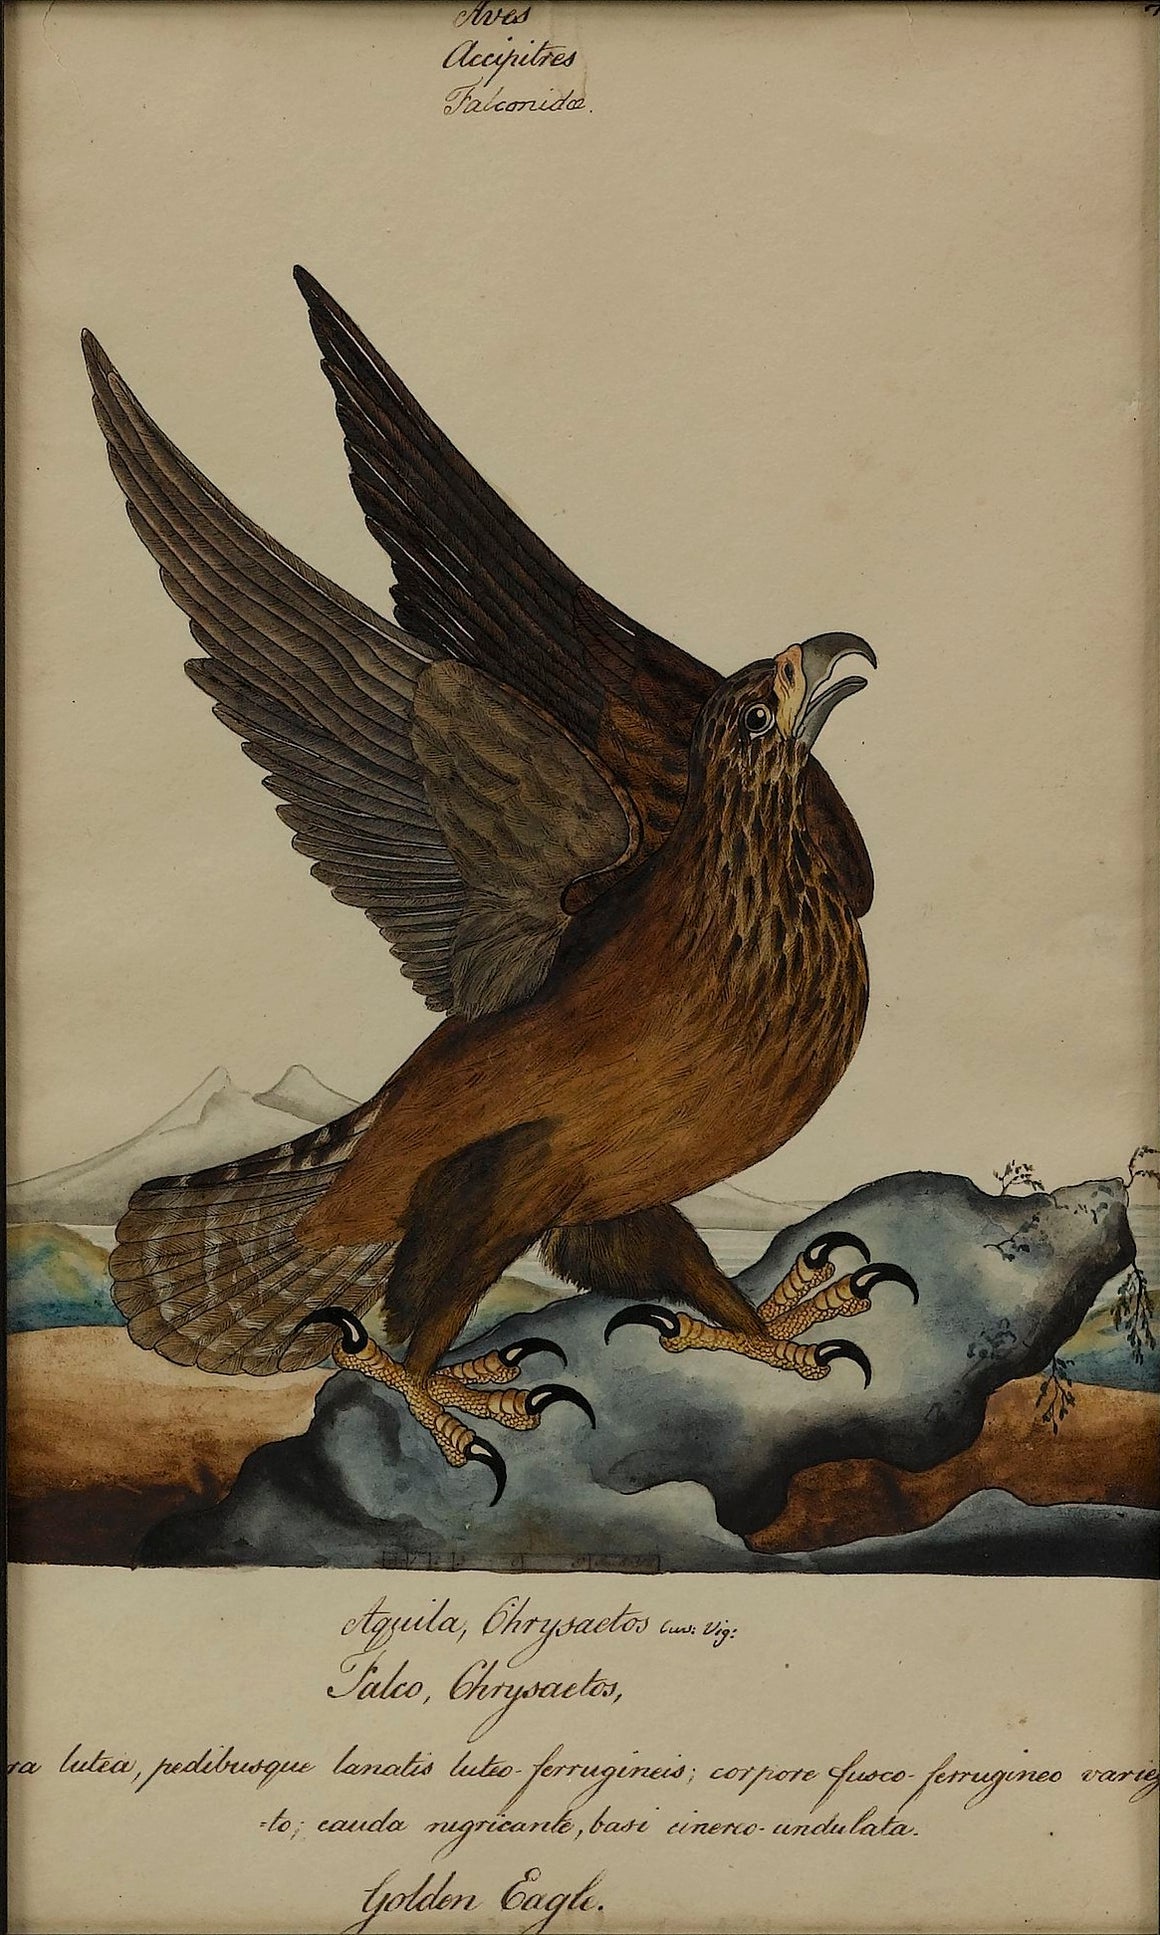 "Golden Eagle" by William Goodall, Watercolor and Ink Drawing, Early 19th Century